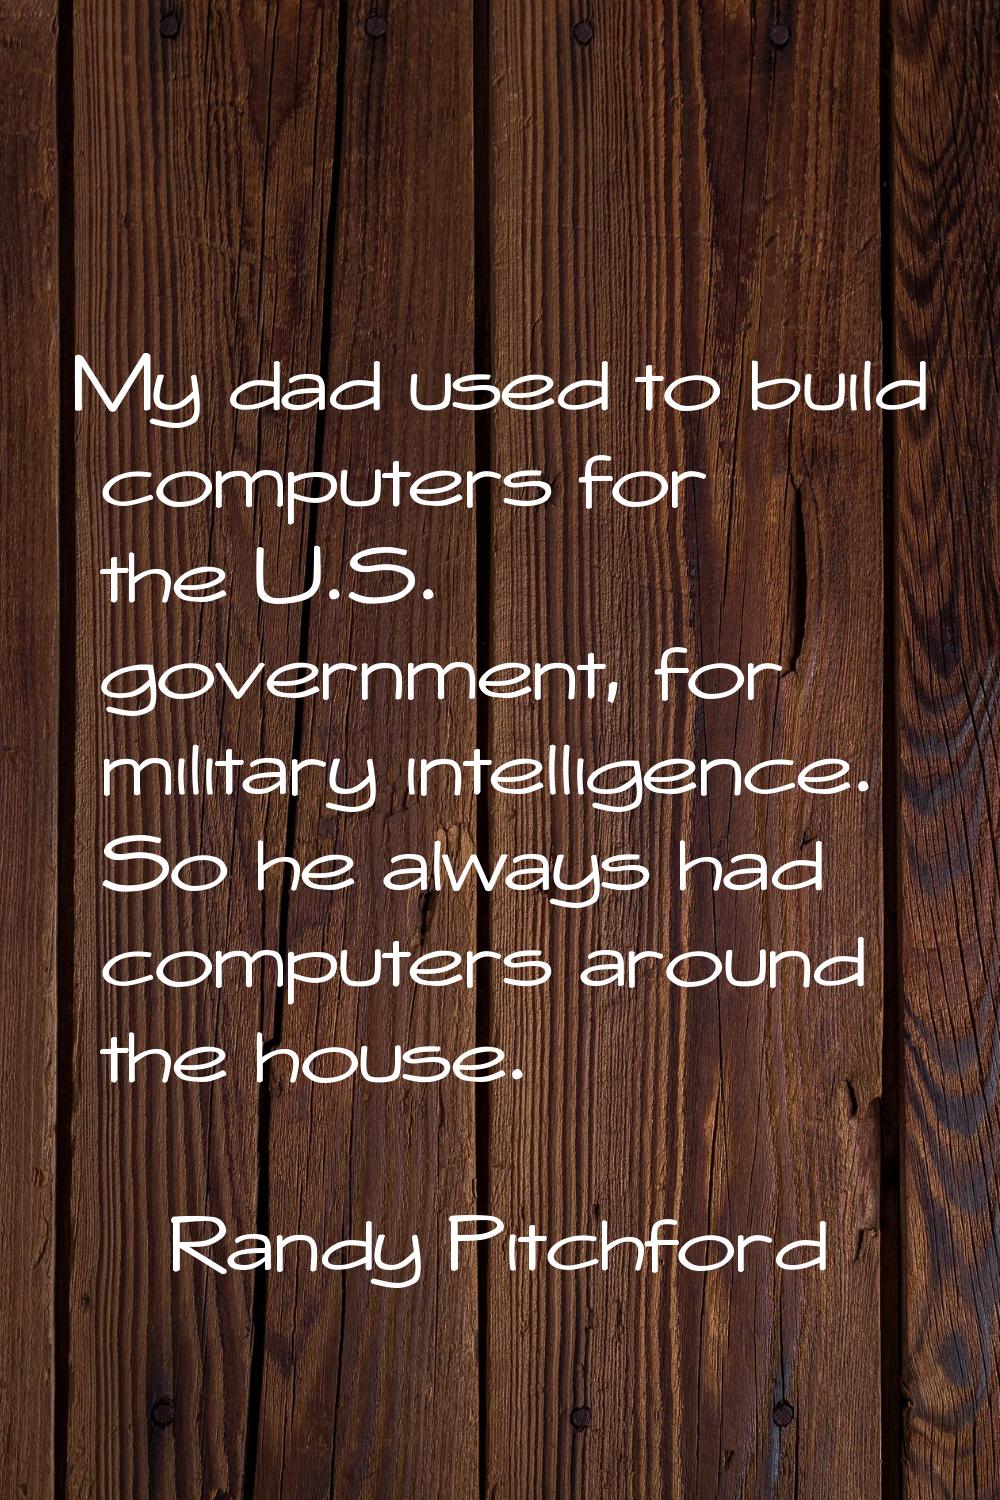 My dad used to build computers for the U.S. government, for military intelligence. So he always had